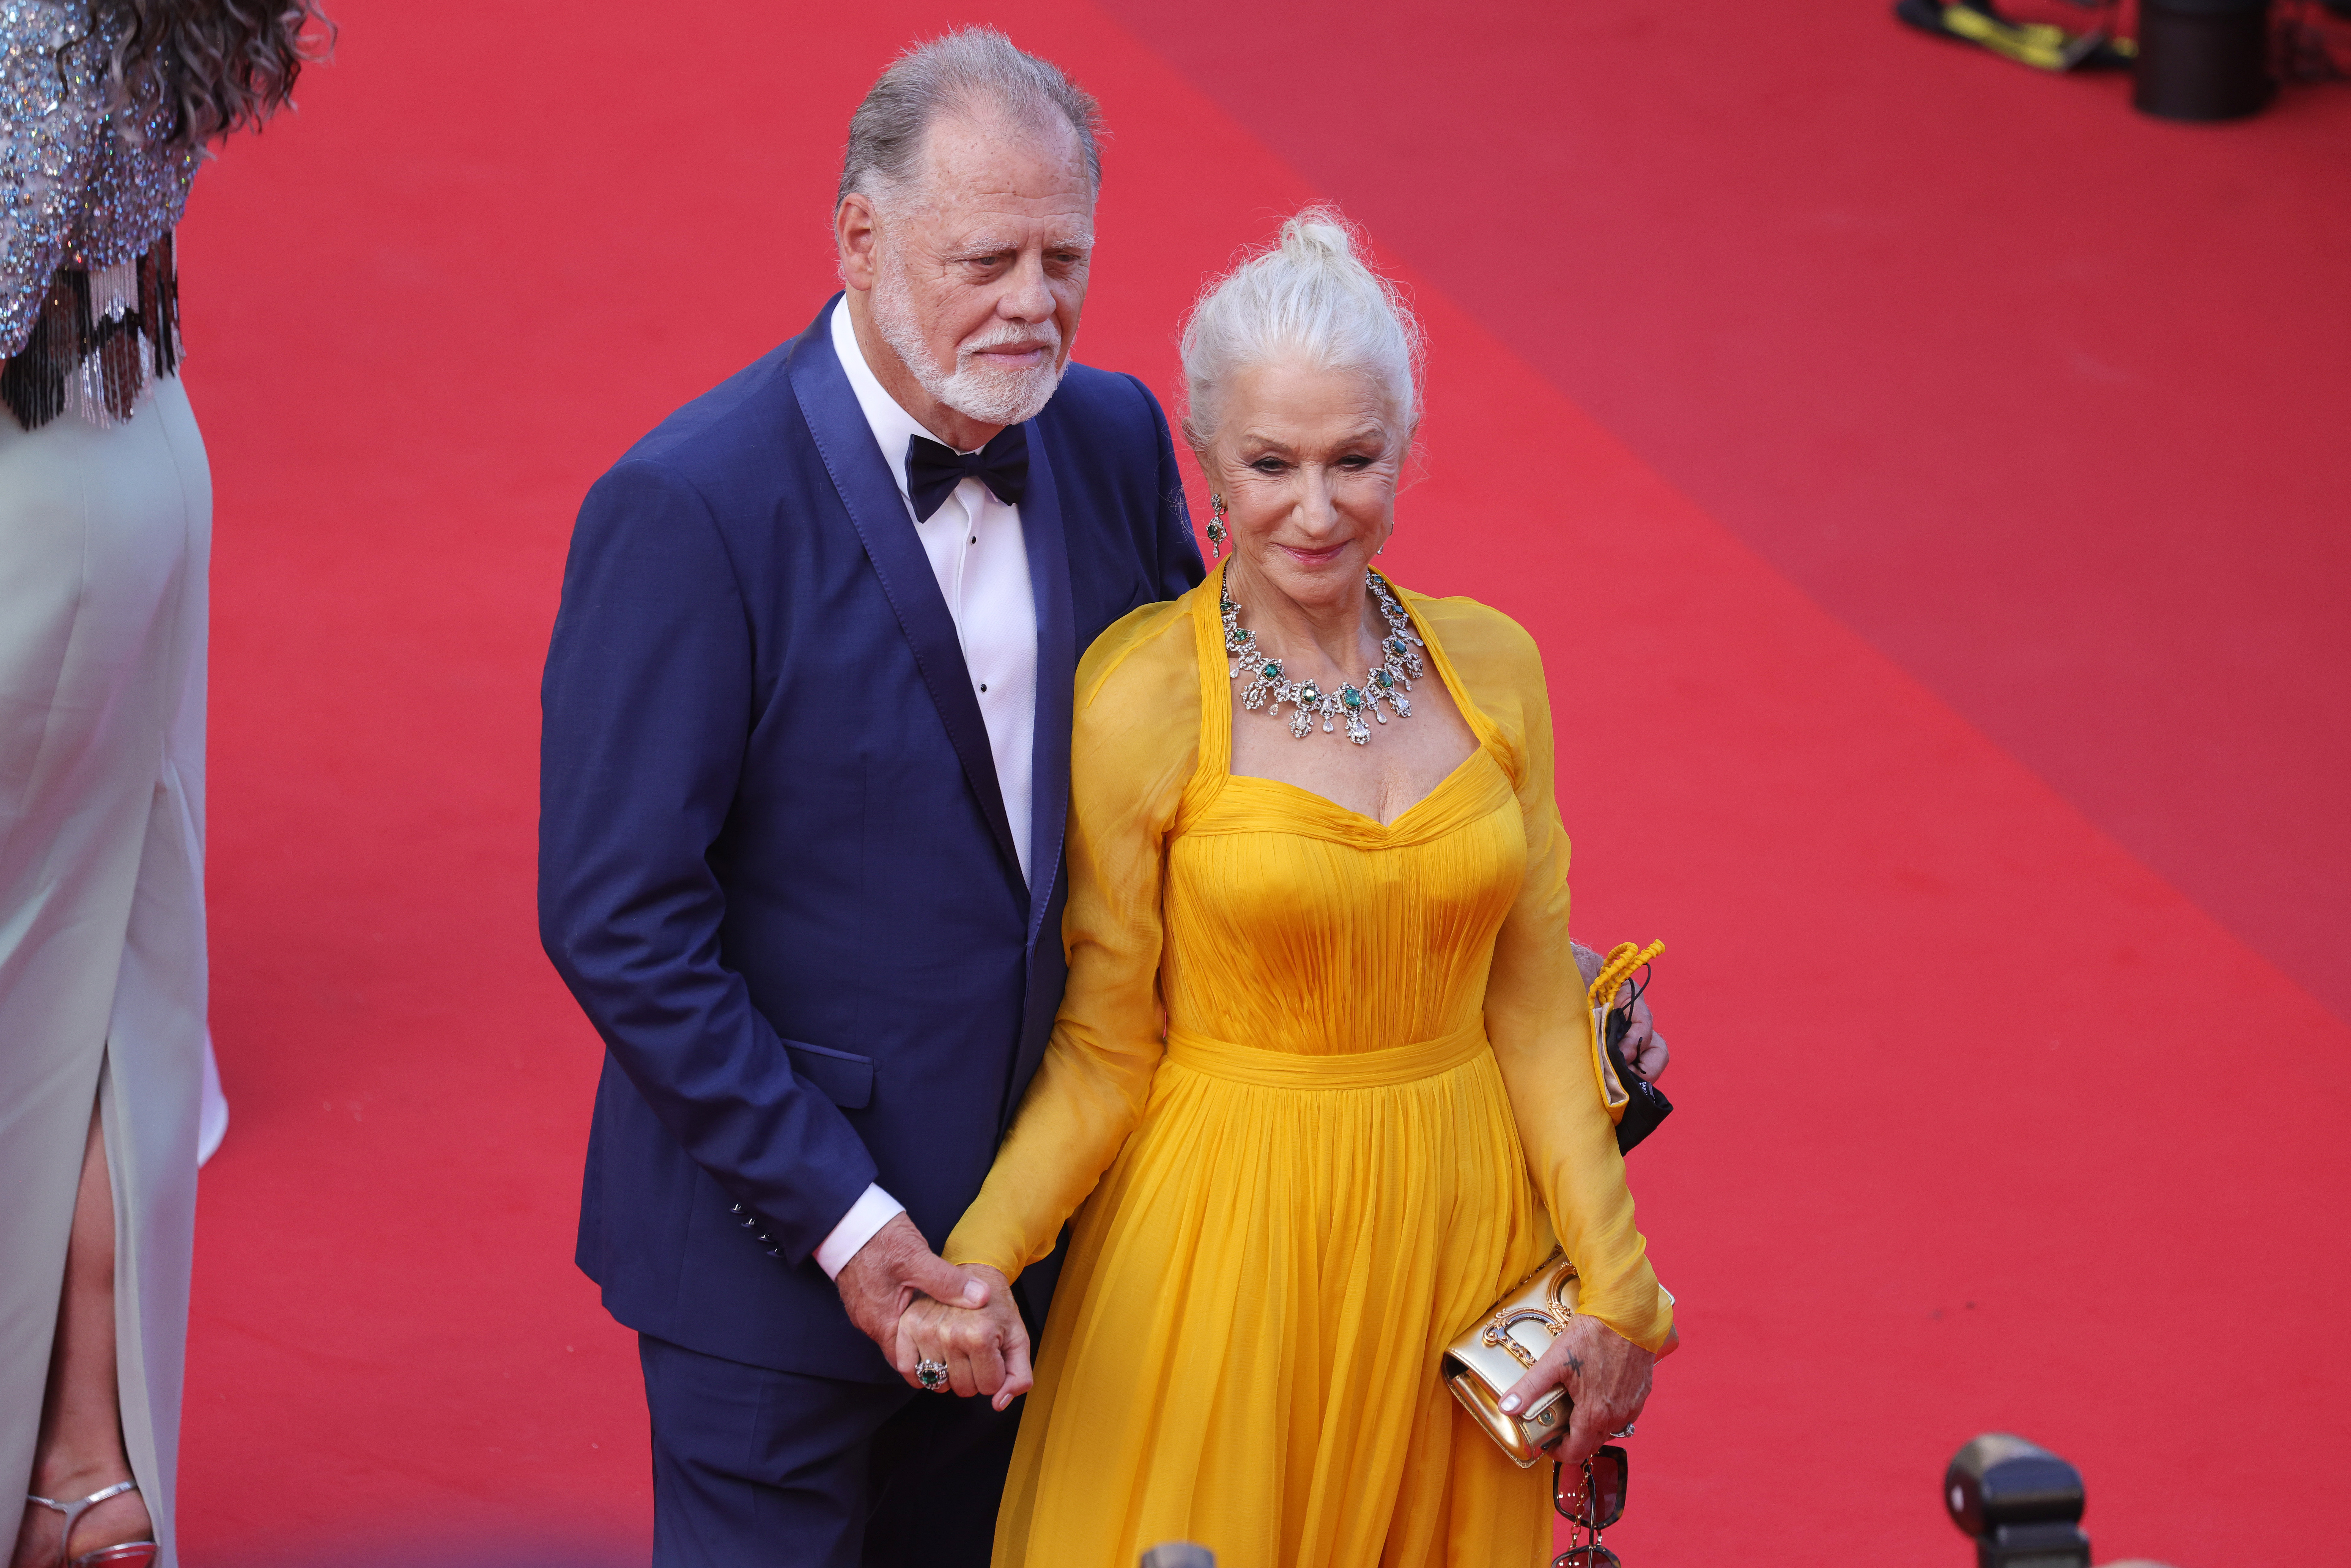 Taylor Hackford and Dame Helen Mirren in Cannes, France on July 06, 2021 | Source: Getty Images